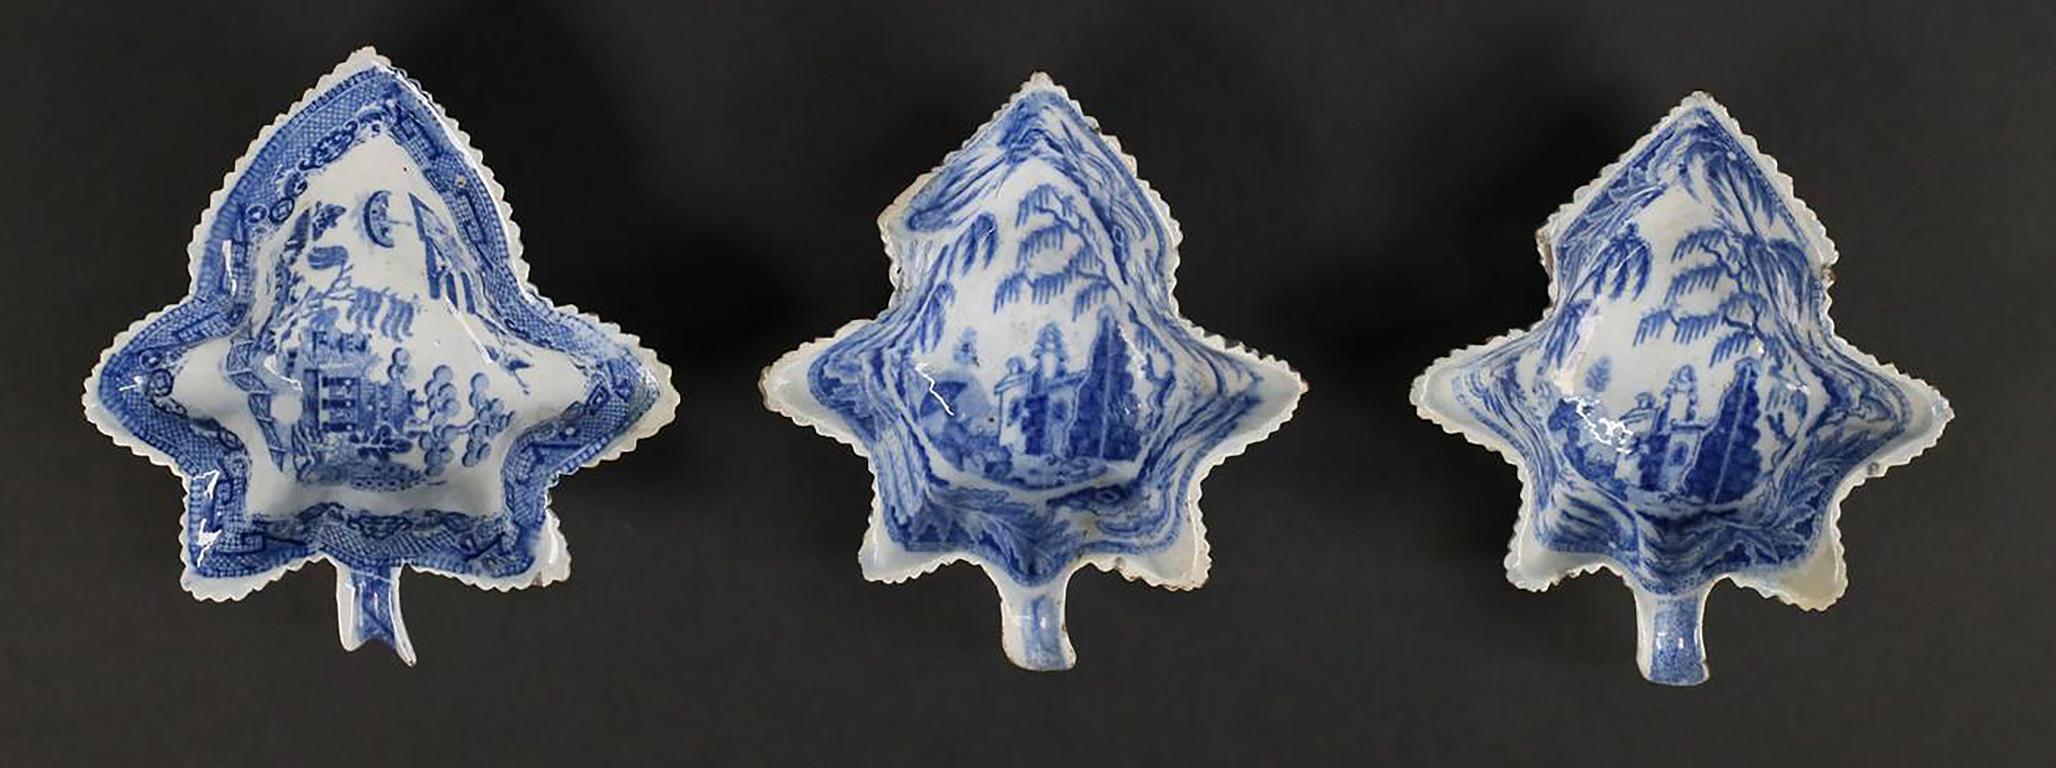 Three Blue and White Staffordshire Porcelain Leaf Form Dishes with Canton style Chinoiserie scenes

Anonymous
Staffordshire, England; First half of the 19th century
Porcelain blue transferware

Approximate size: 5.25 (l) x 5 (w) x 1.5 (h) ea.

The